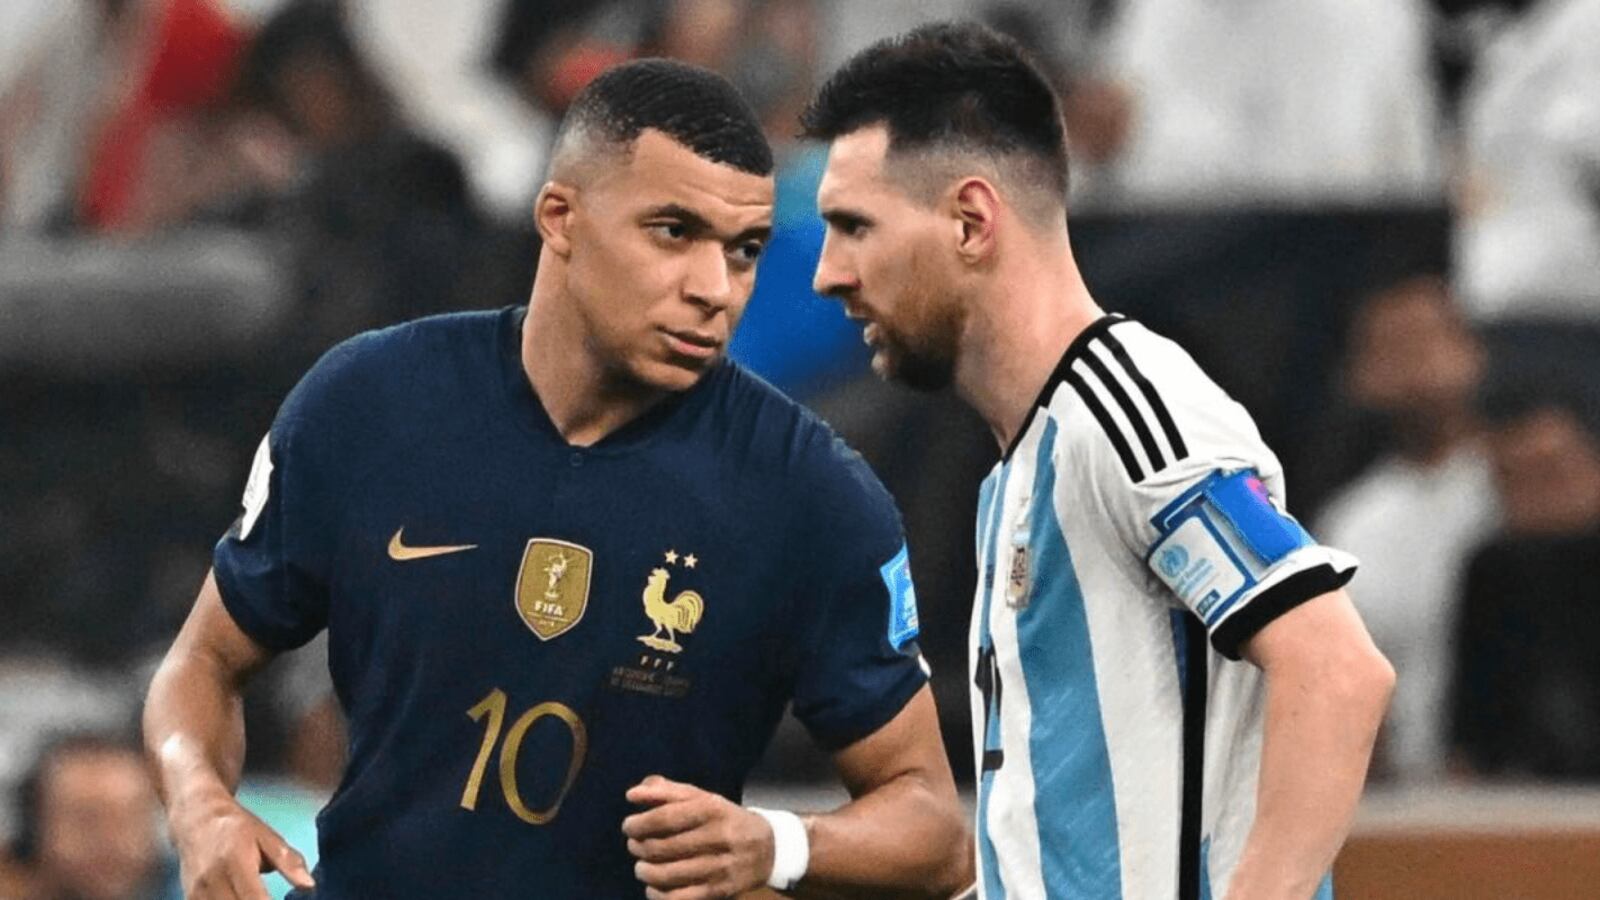 He was champion with France, defends Lionel Messi and puts him above Mbappé